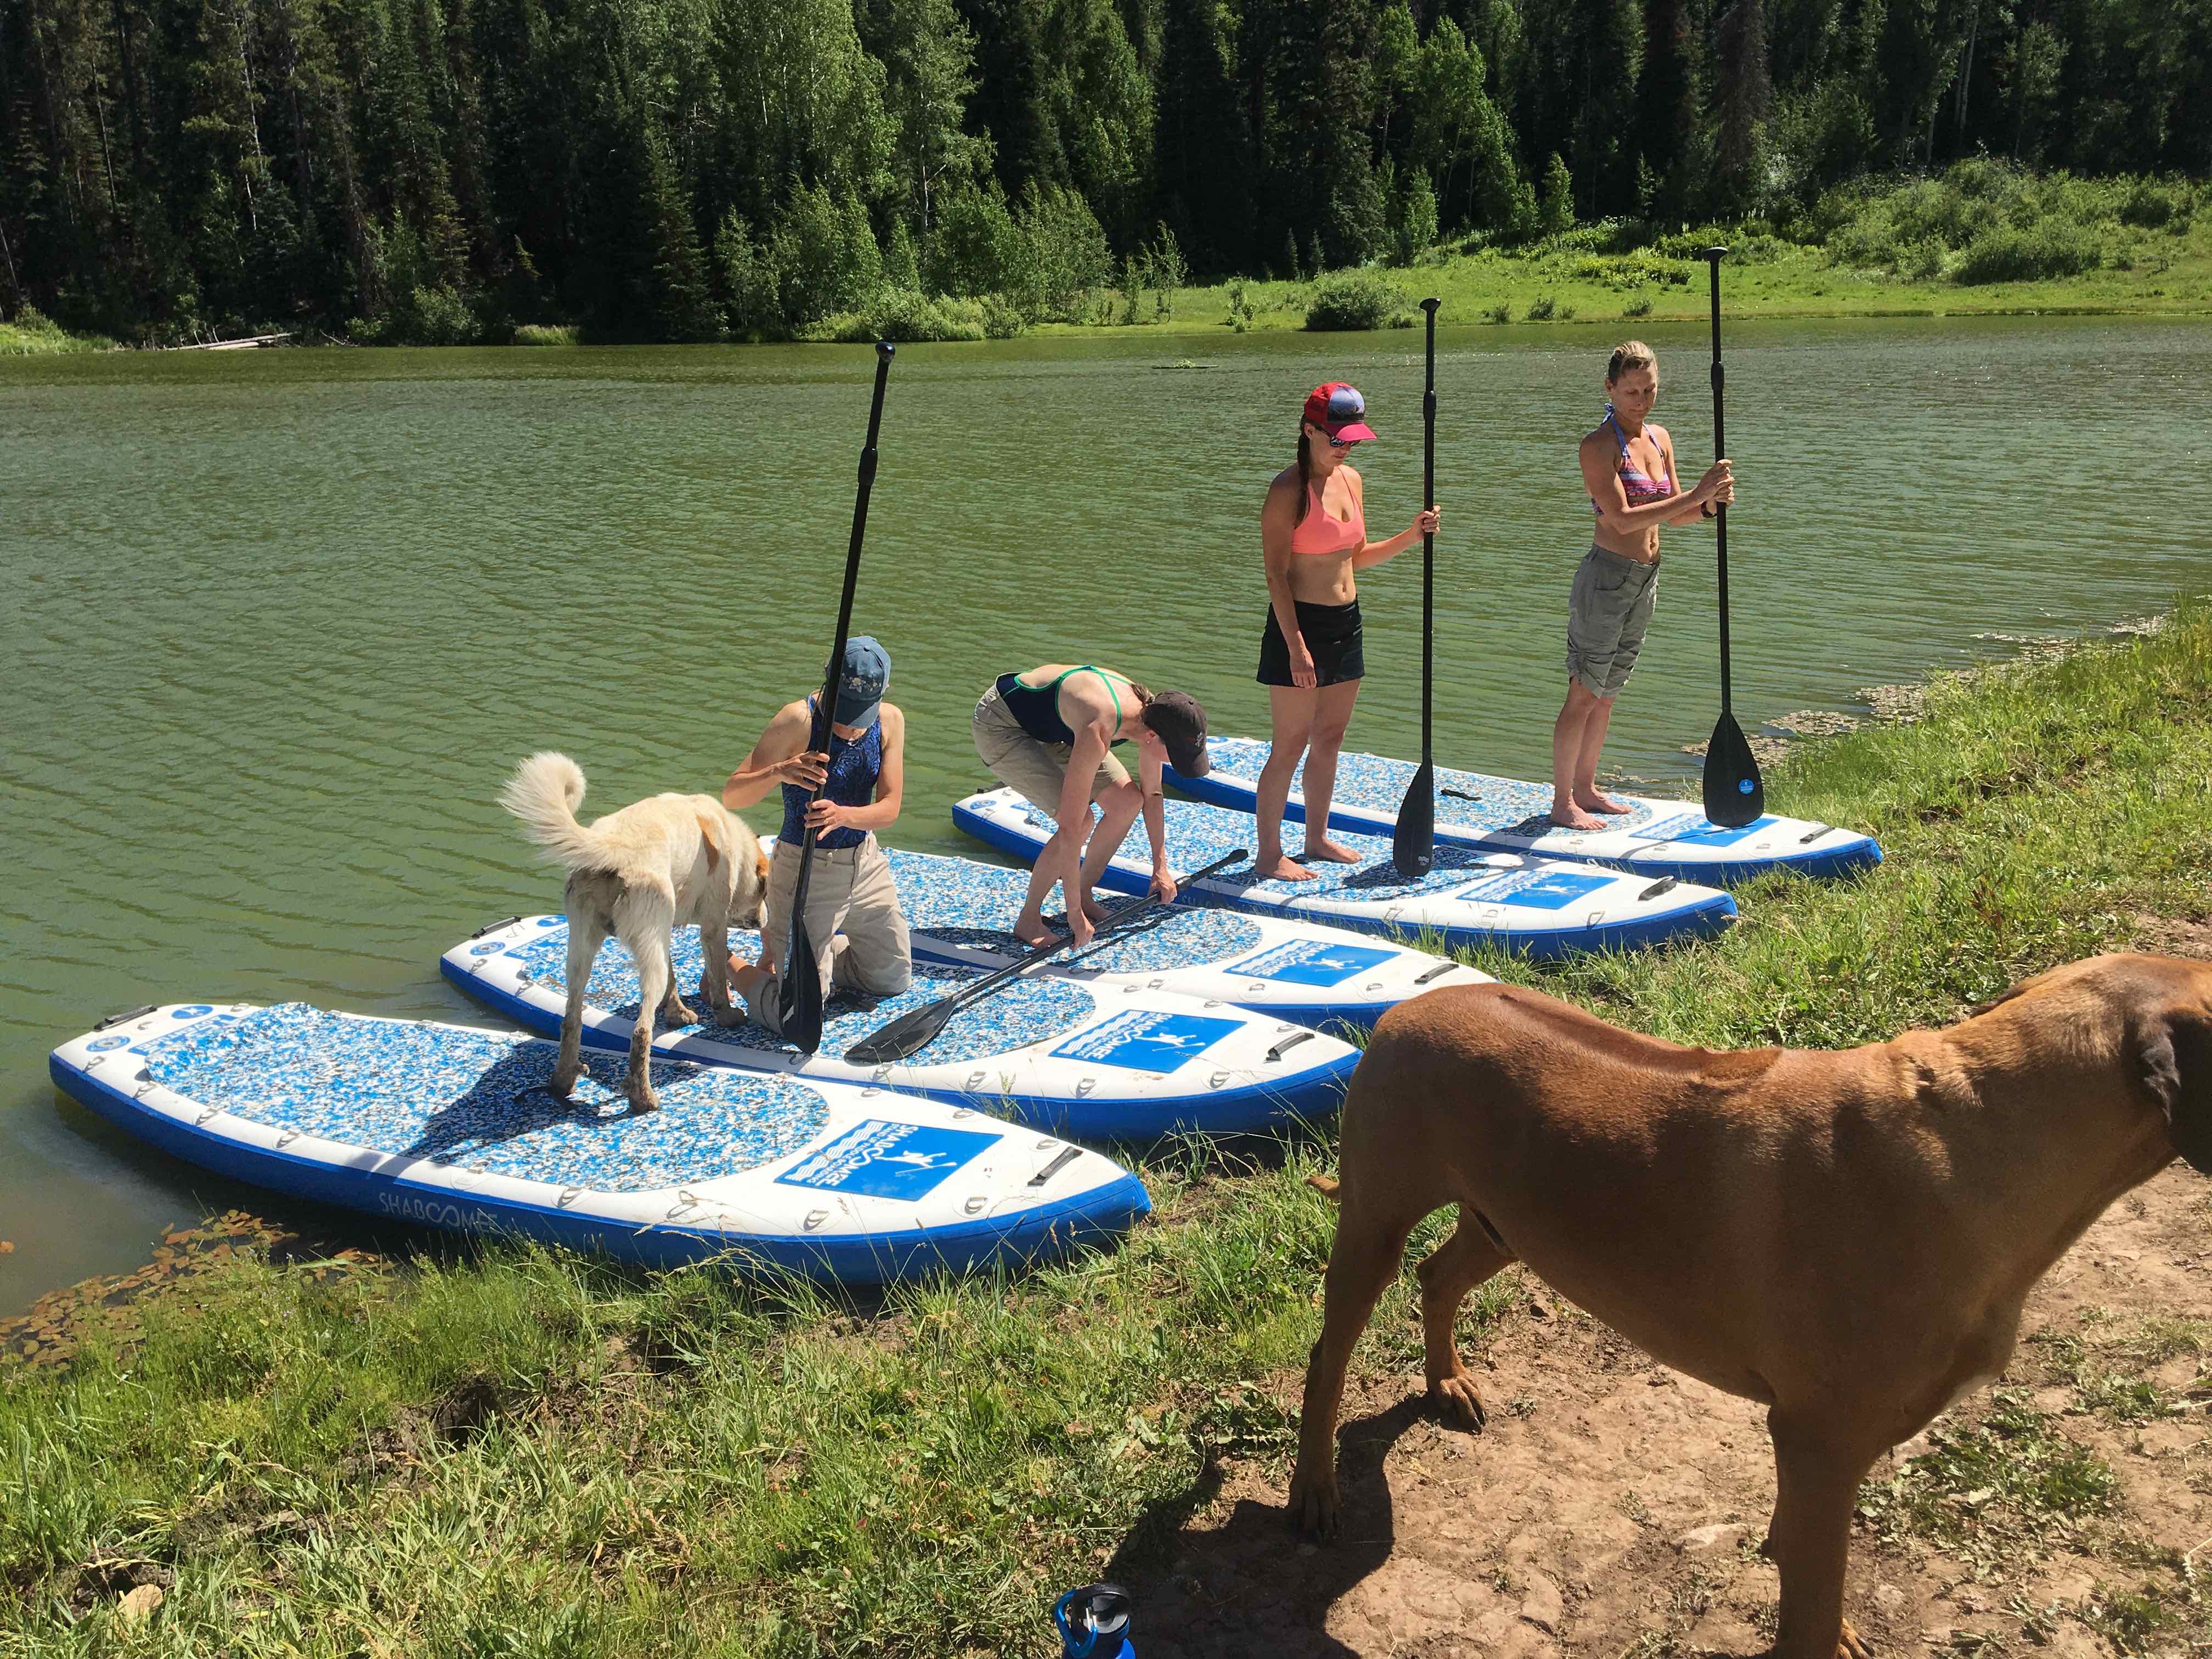 Paddle boarding at Ute Lodge